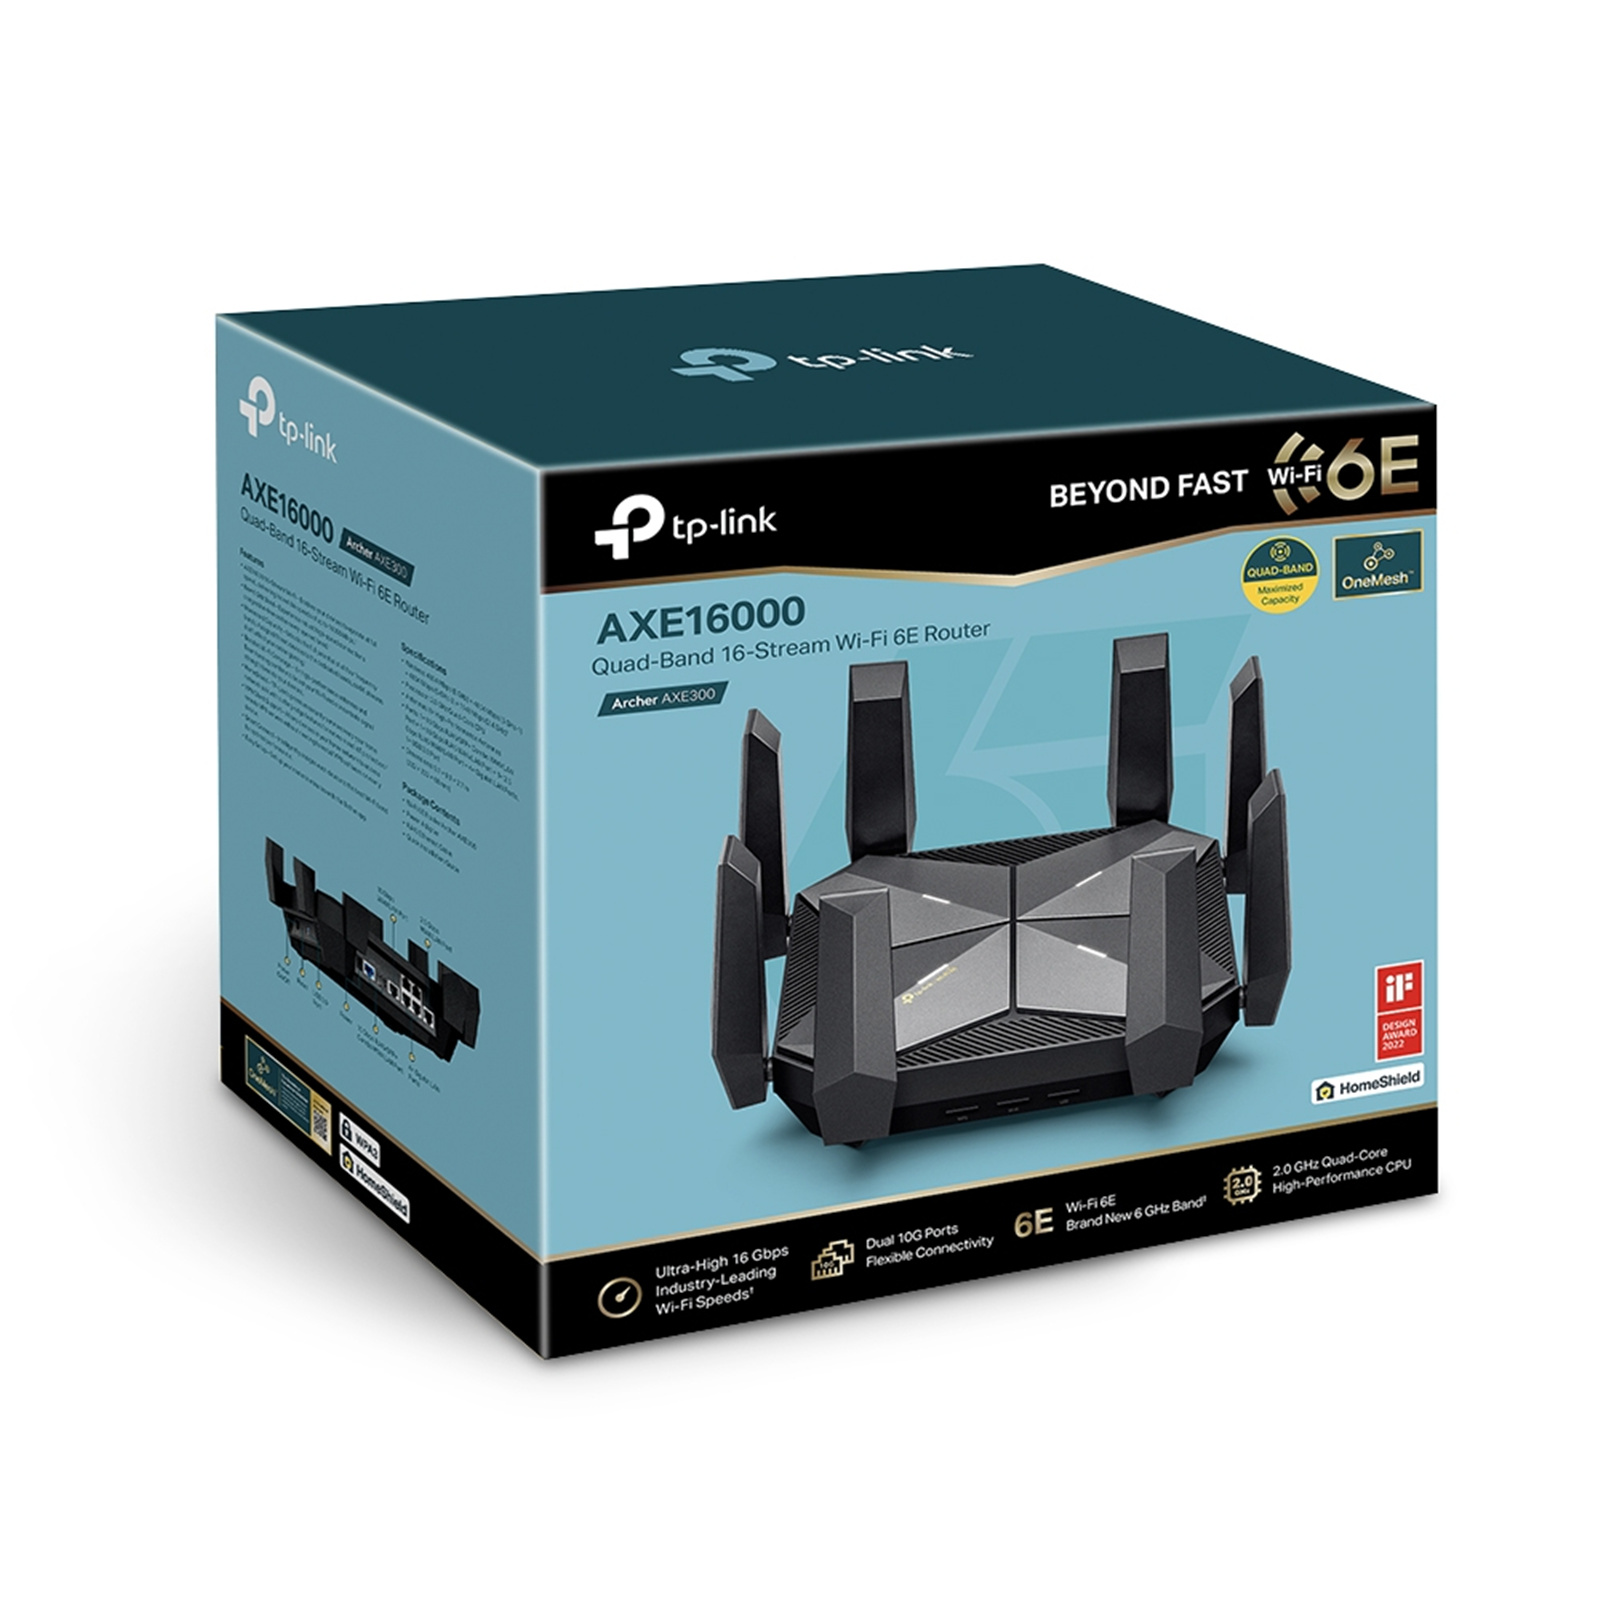 TP-Link AXE16000 Quad-Band WiFi 6E Router (Archer AXE300) - Dual 10Gb Ports  Wireless Internet Router, Gaming Router, Supports VPN Client, 2.5G WAN/LAN